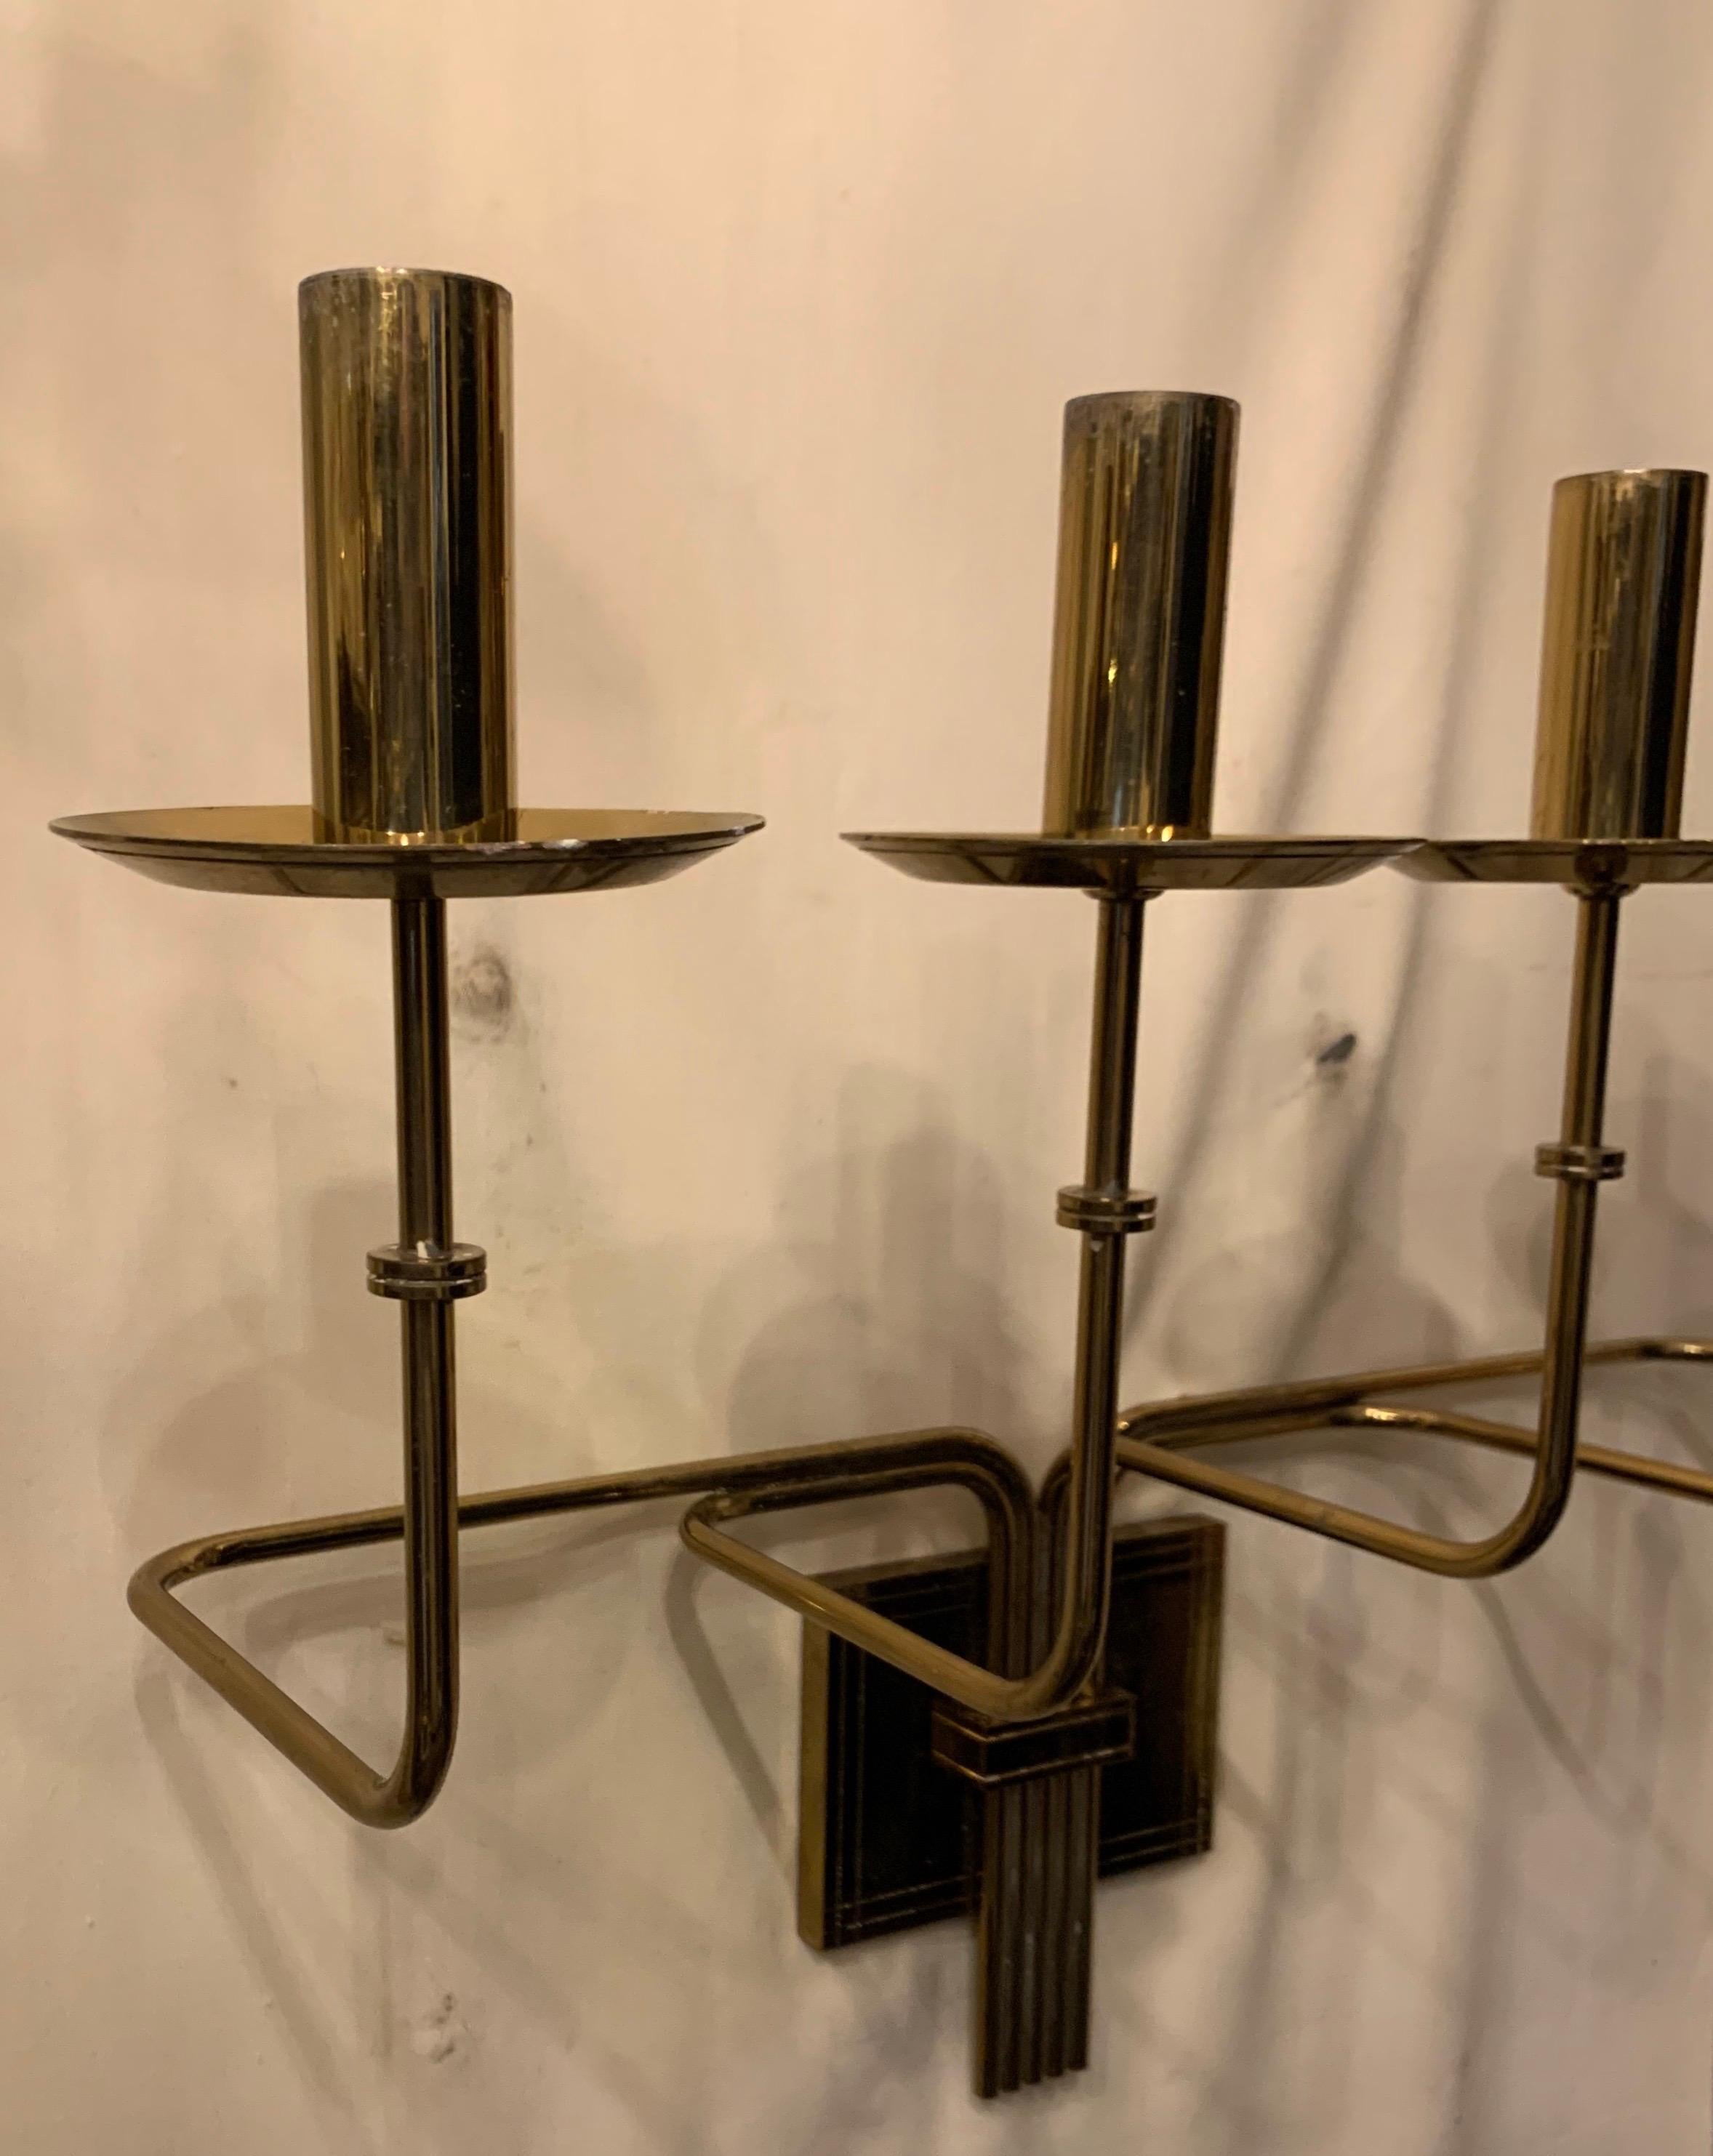 Central American Mid-Century Modern Large Tommi Parzinger Brass Five-Arm Candelabra Sconce Dorlyn